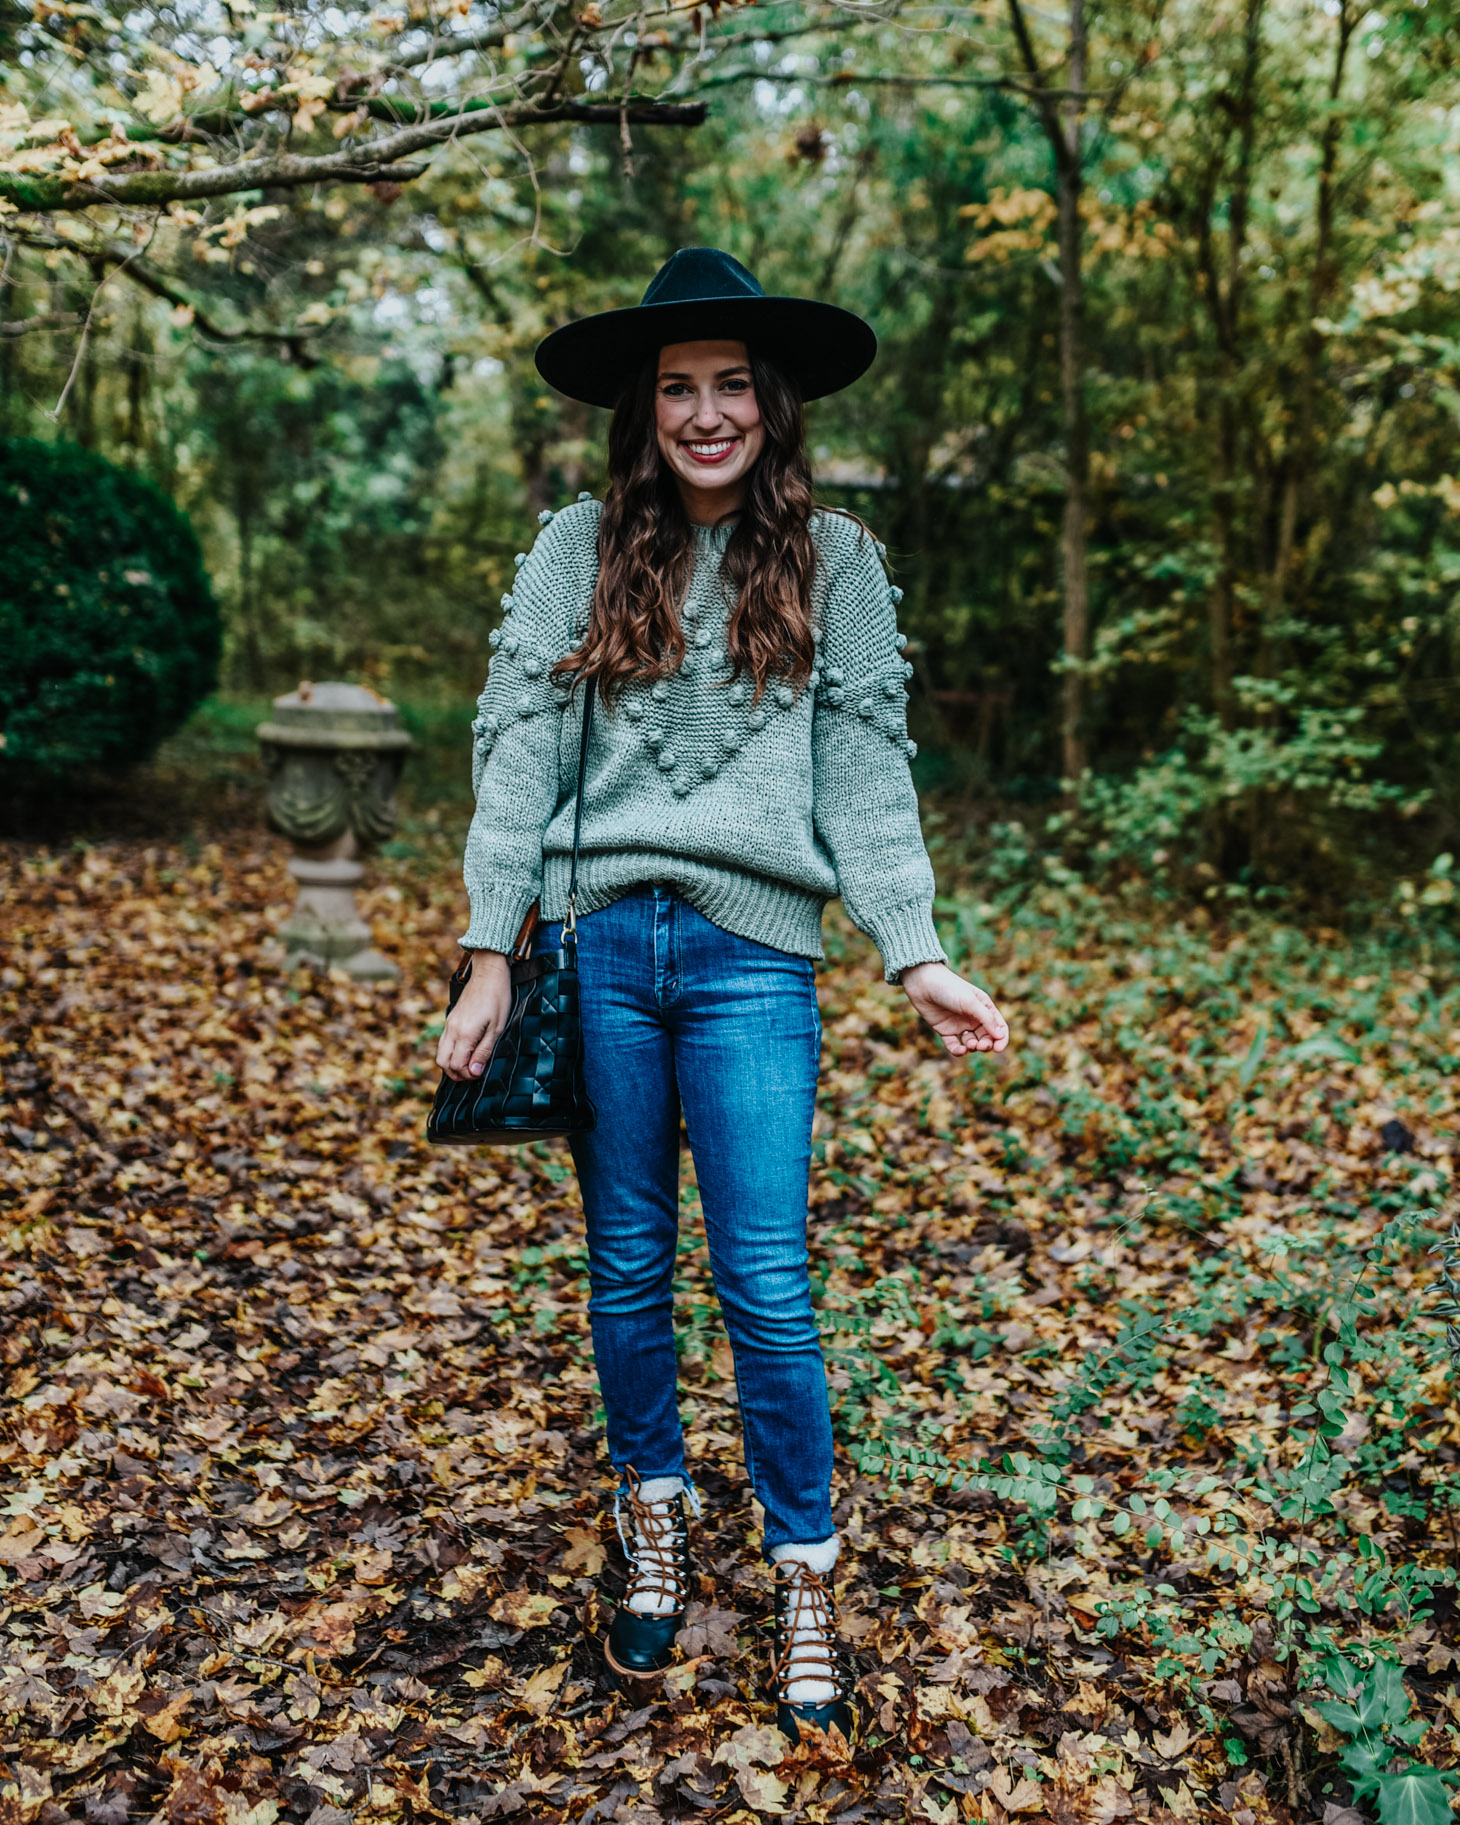 Outfits to Wear with Combat Boots This Fall